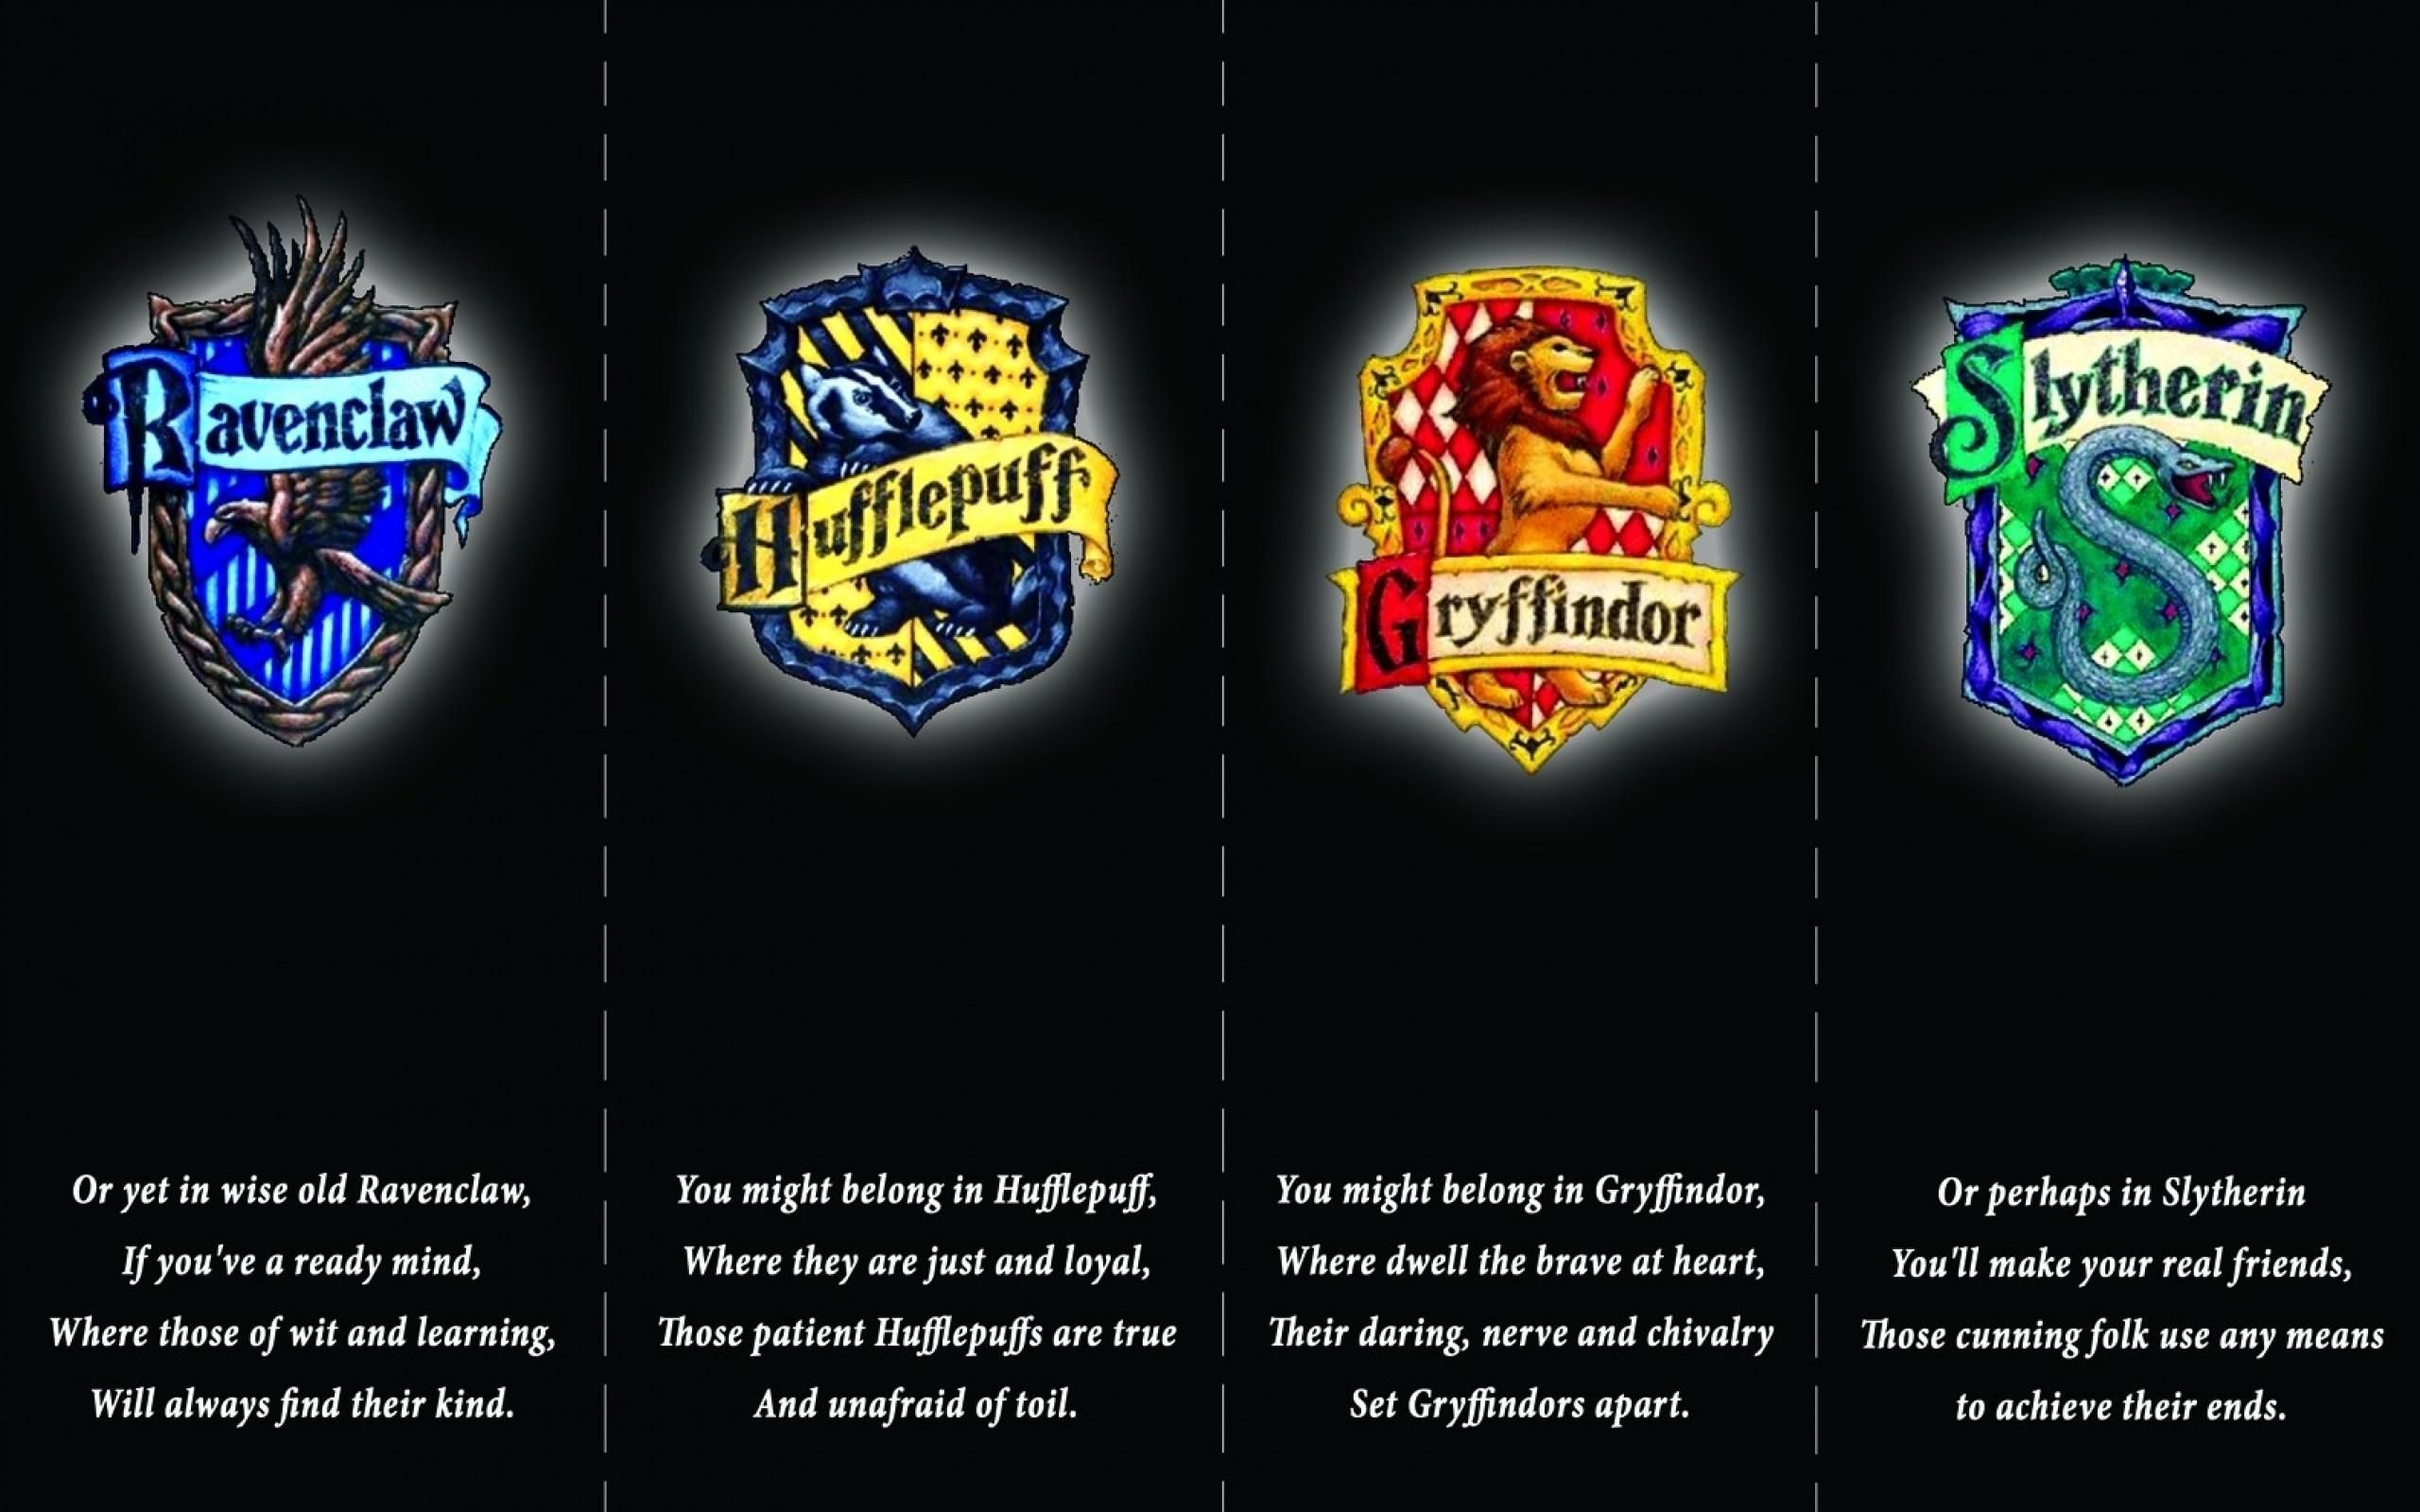 Gryffindor Quotes Wallpapers - Wallpaper Cave